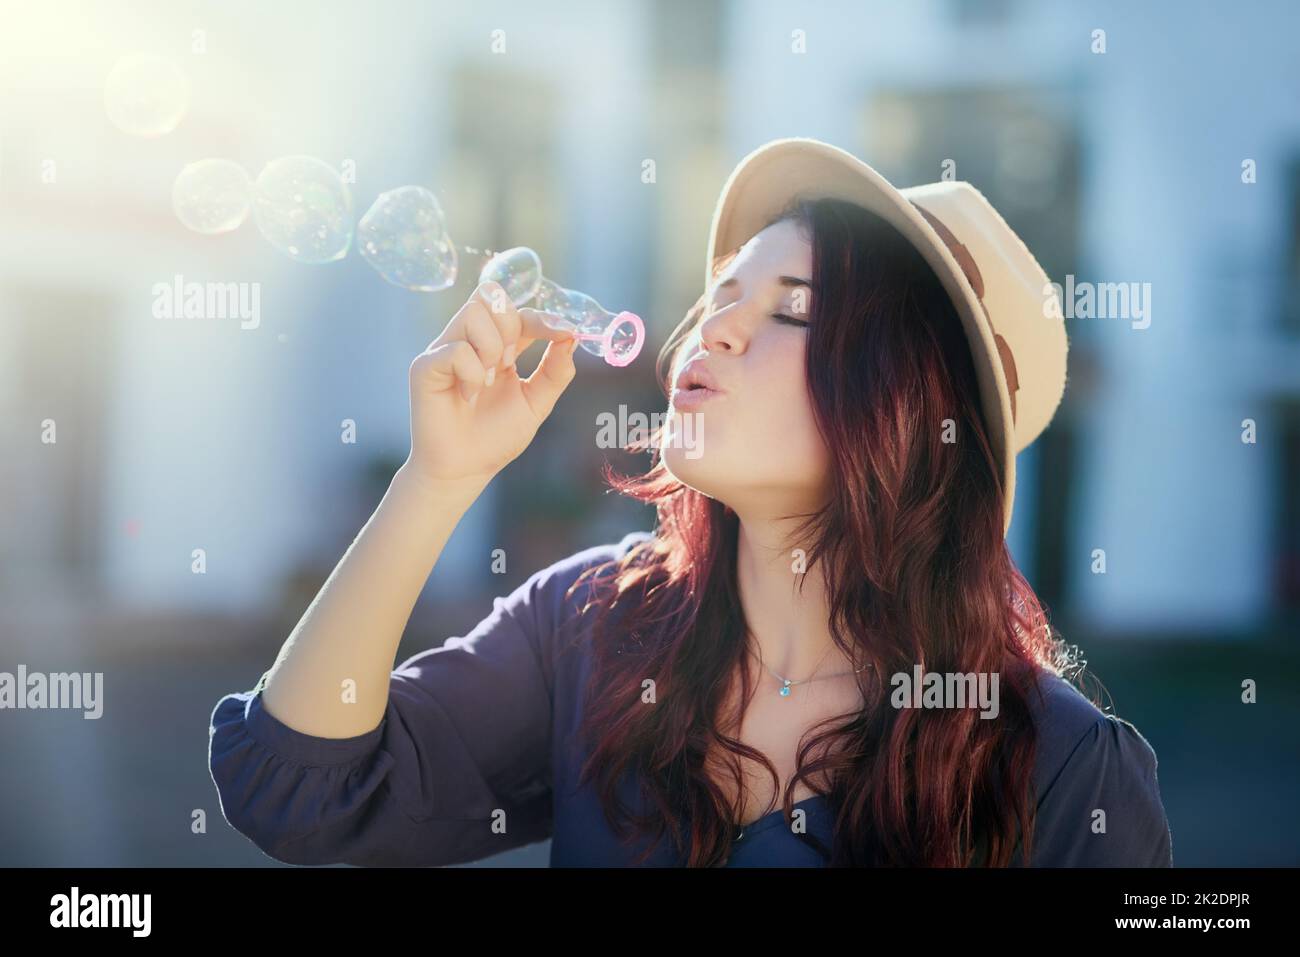 Just blow with the flow. Shot of an attractive young woman blowing bubbles outside. Stock Photo